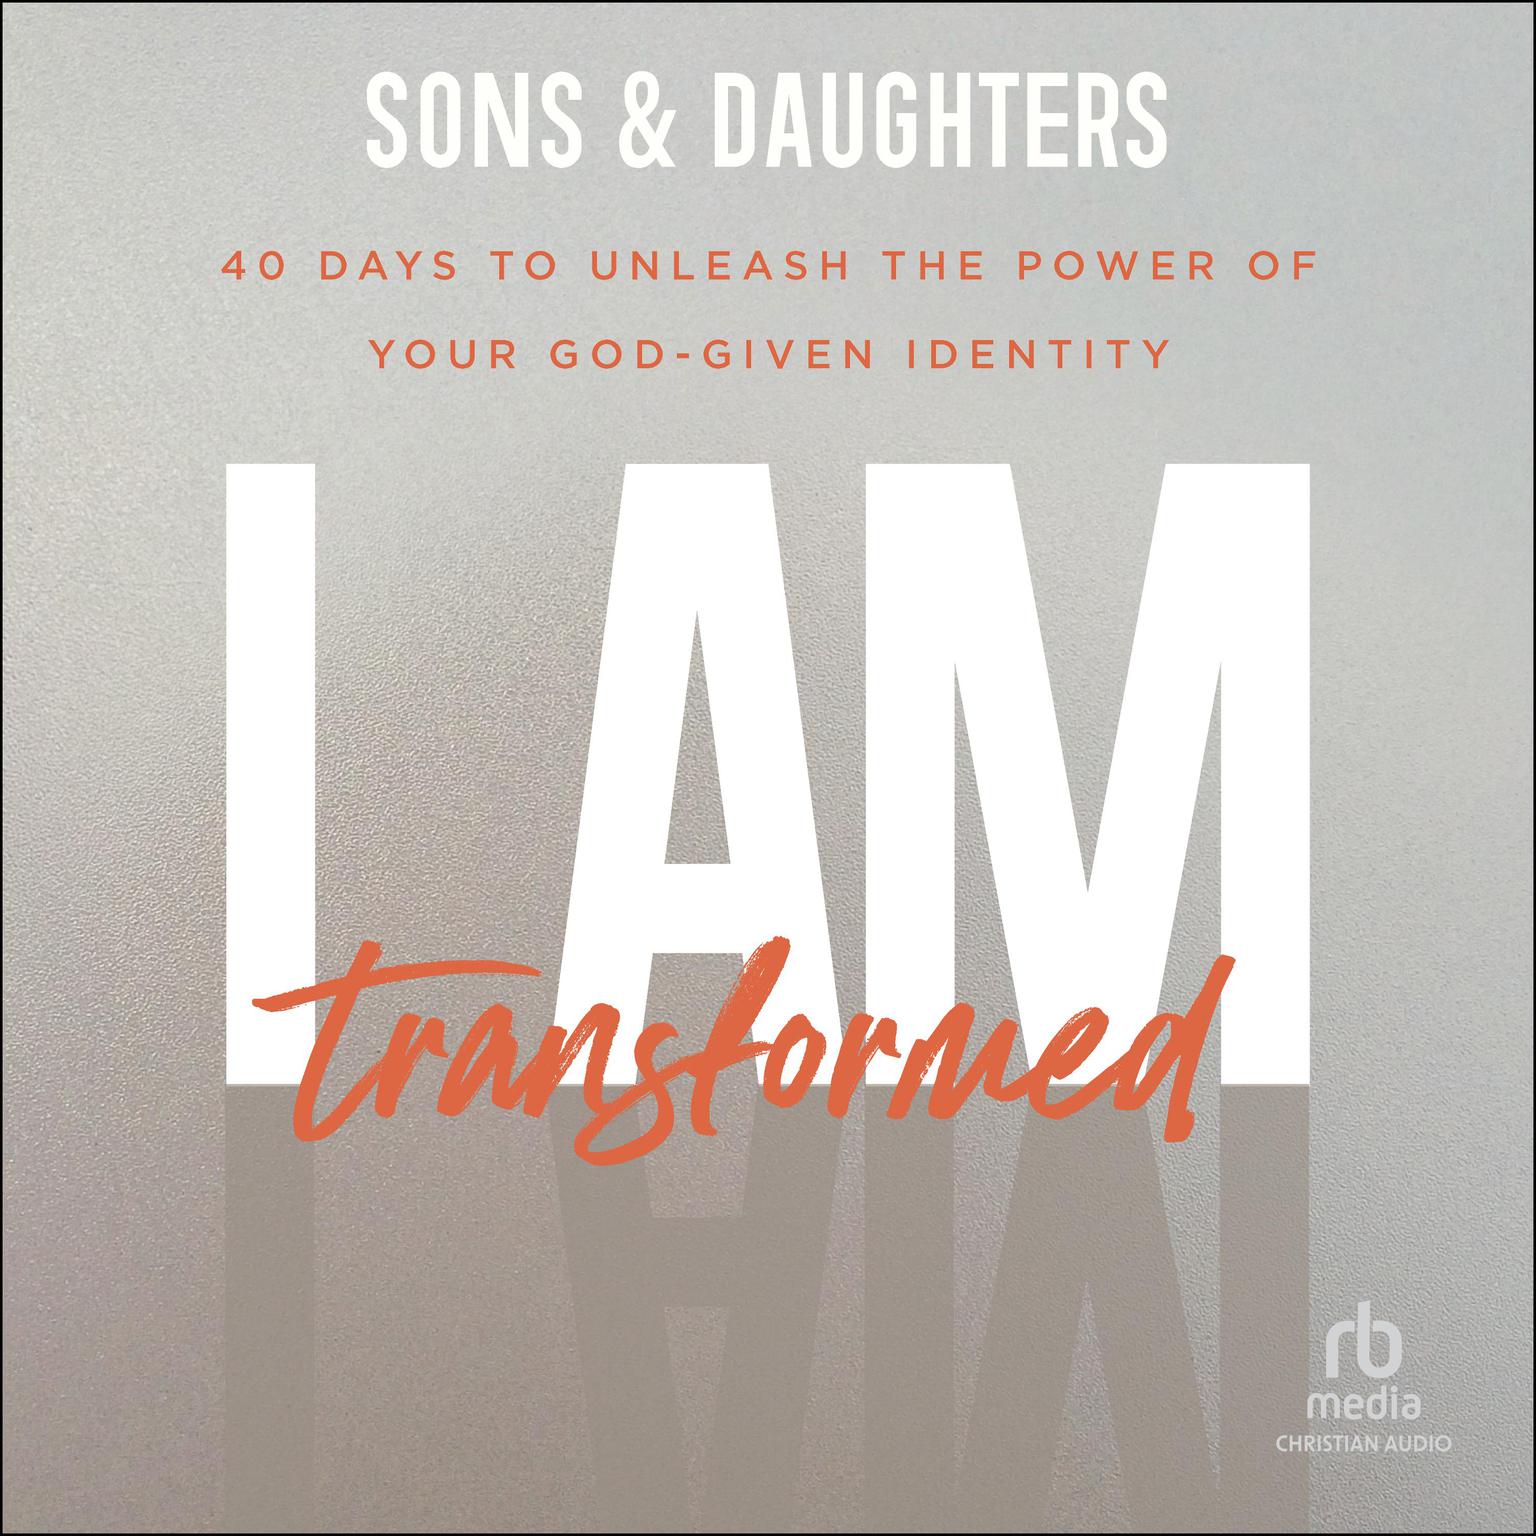 I Am Transformed: 40 Days to Unleash the Power of Your God-Given Identity Audiobook, by Sons & Daughters